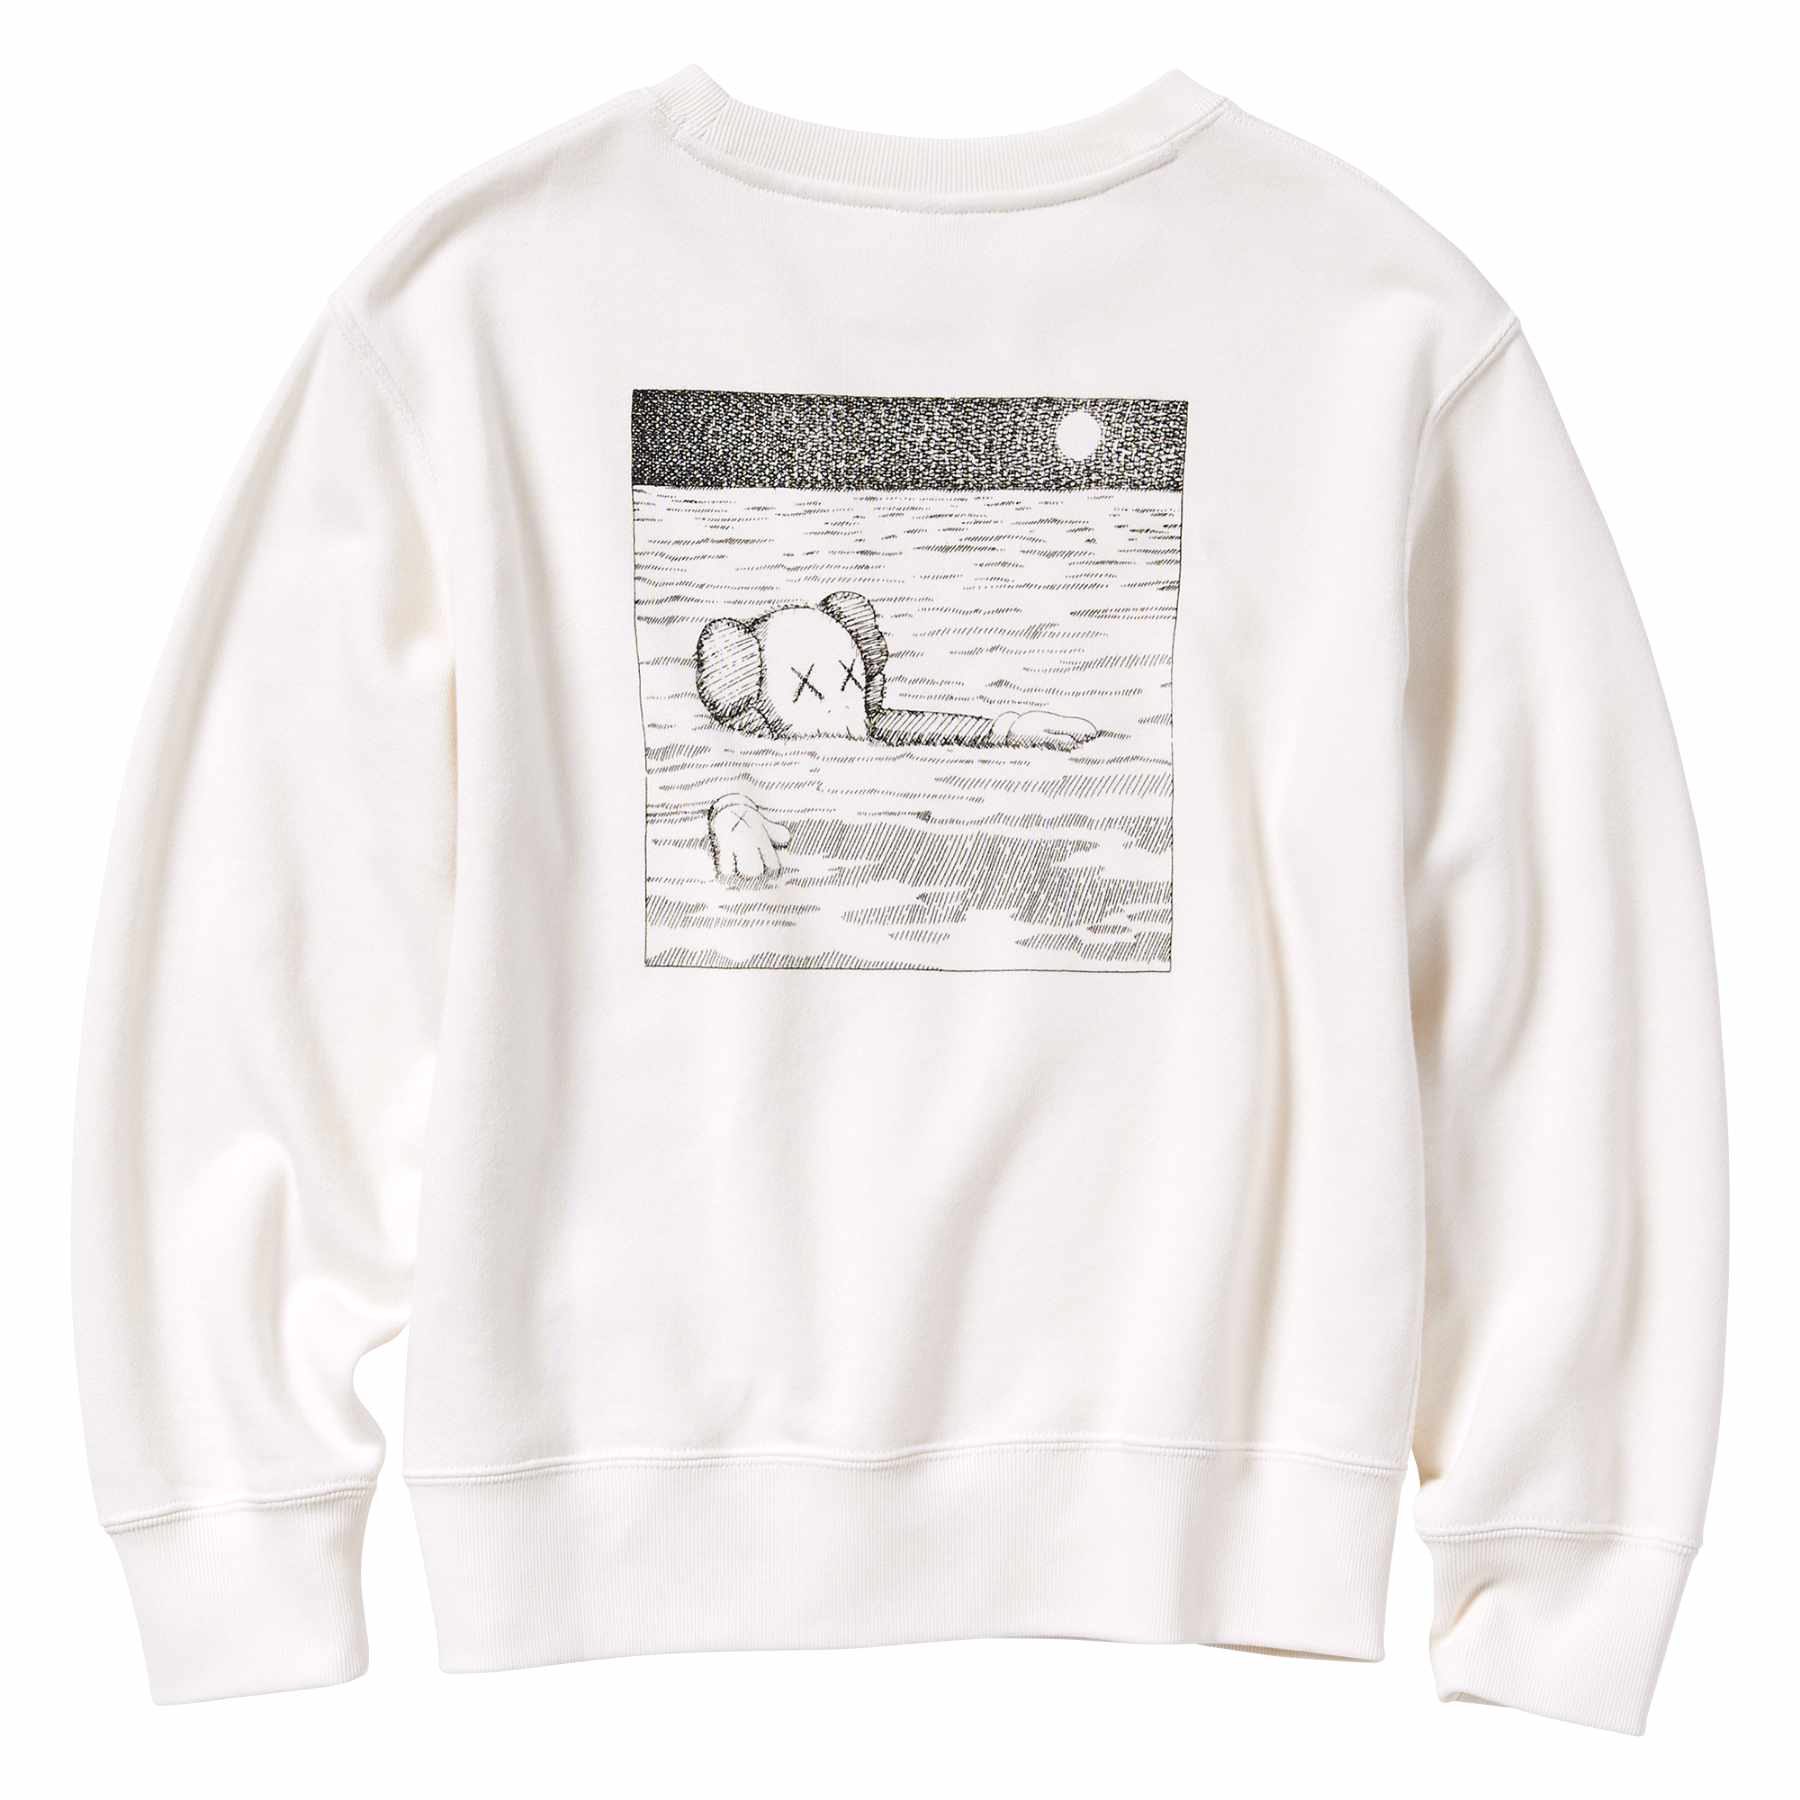 A white KAWS x UNIQLO sweater printed with a 'What Party" artwork